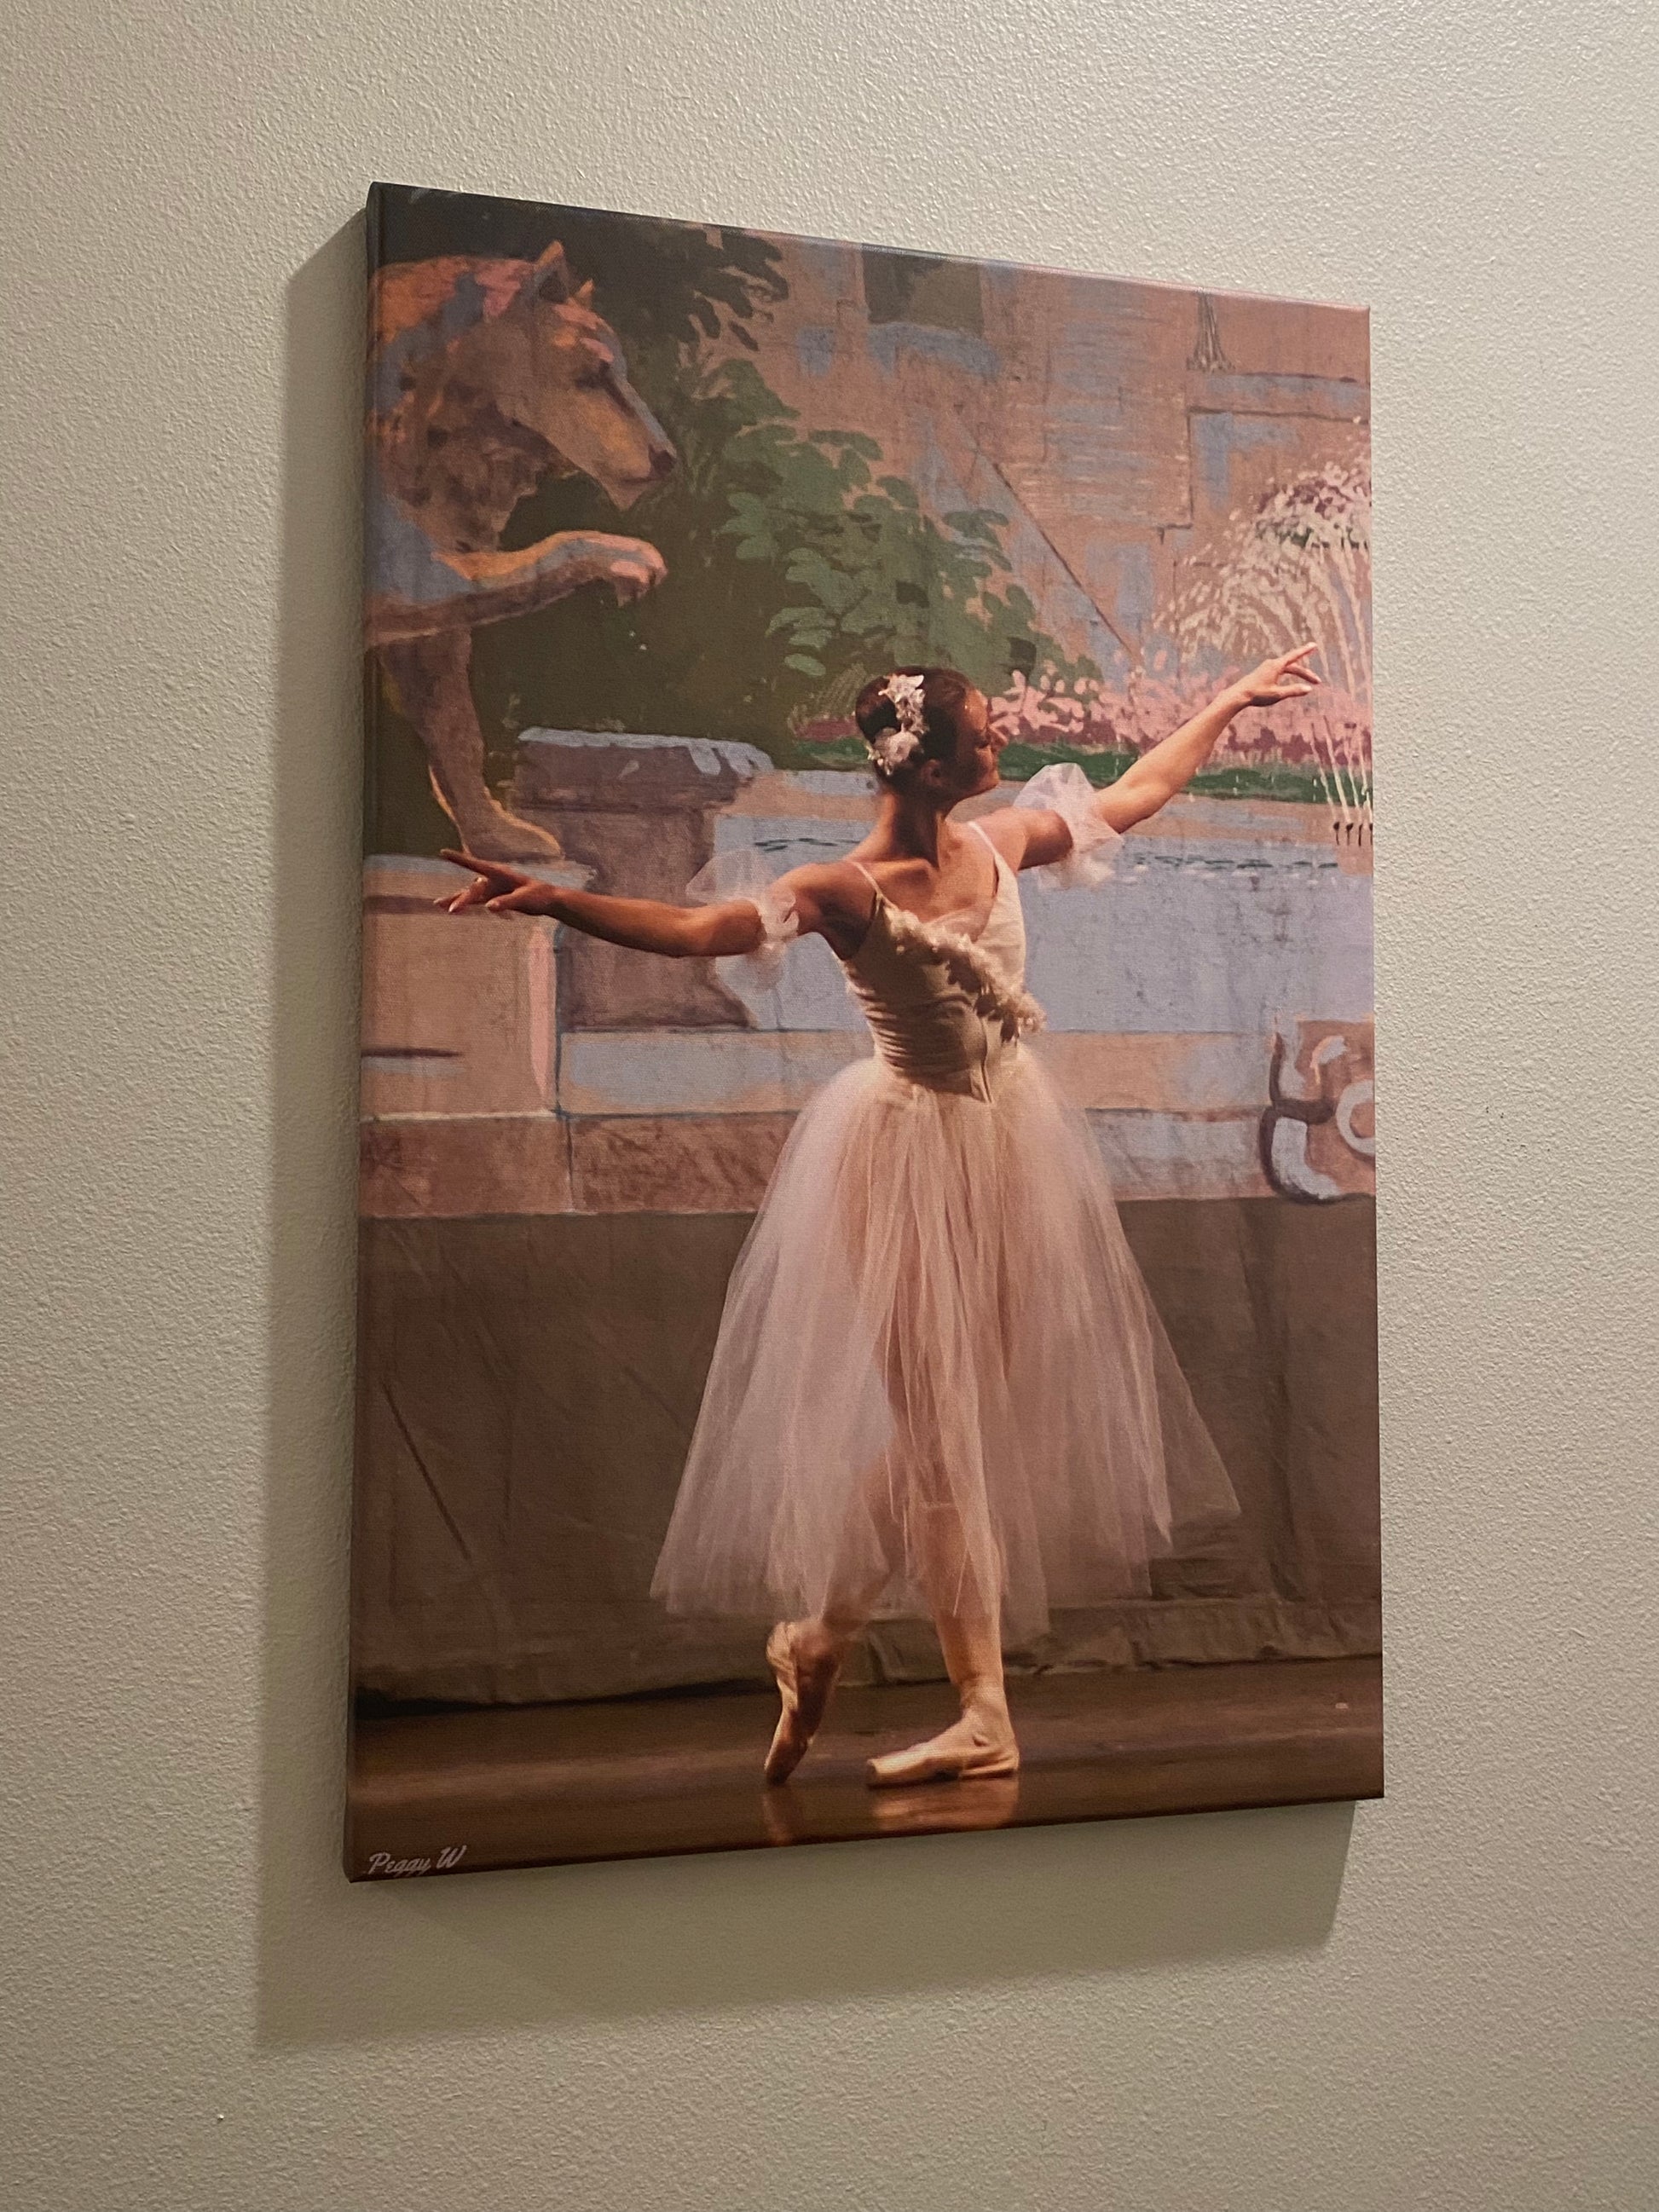 A photo of an oil painting hanging on a wall of a graceful ballerina performing on stage in a white dress with a colorful background